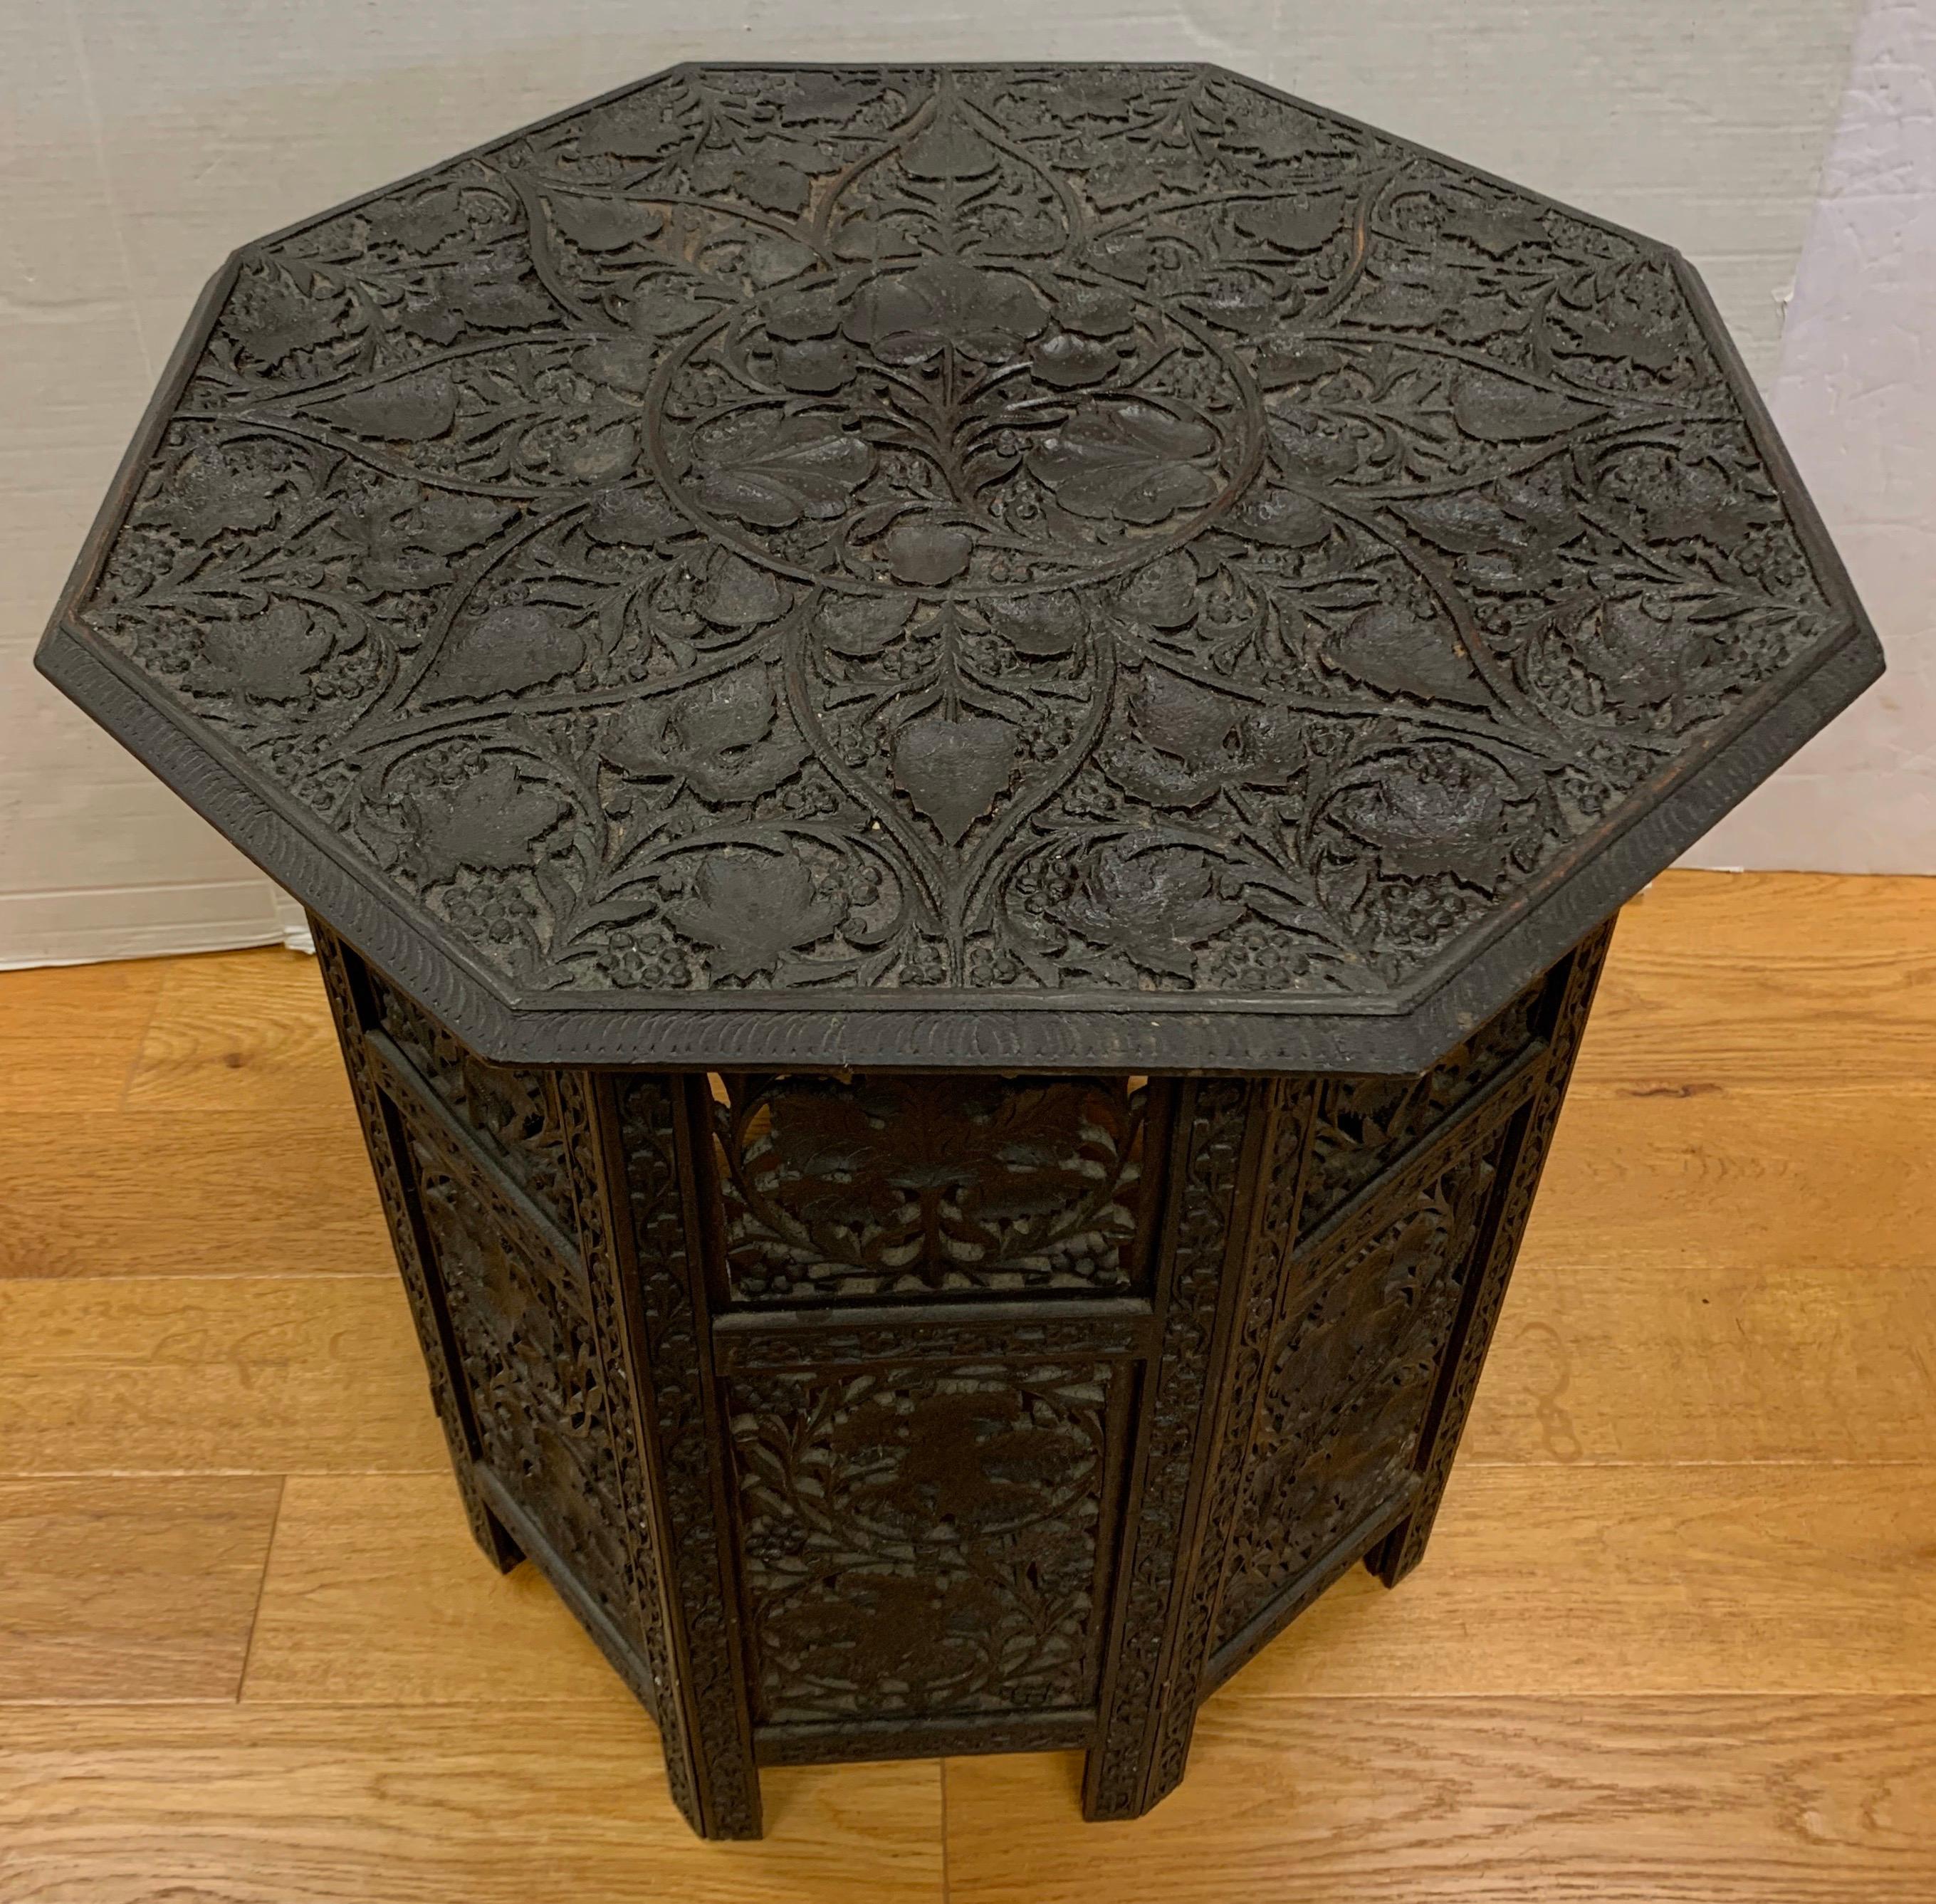 Anglo-Indian hand carved hardwood octagonal occasional table dating from the early 20th century. It has a removable top and an eight sided folding base, both intricately carved with grape vines.